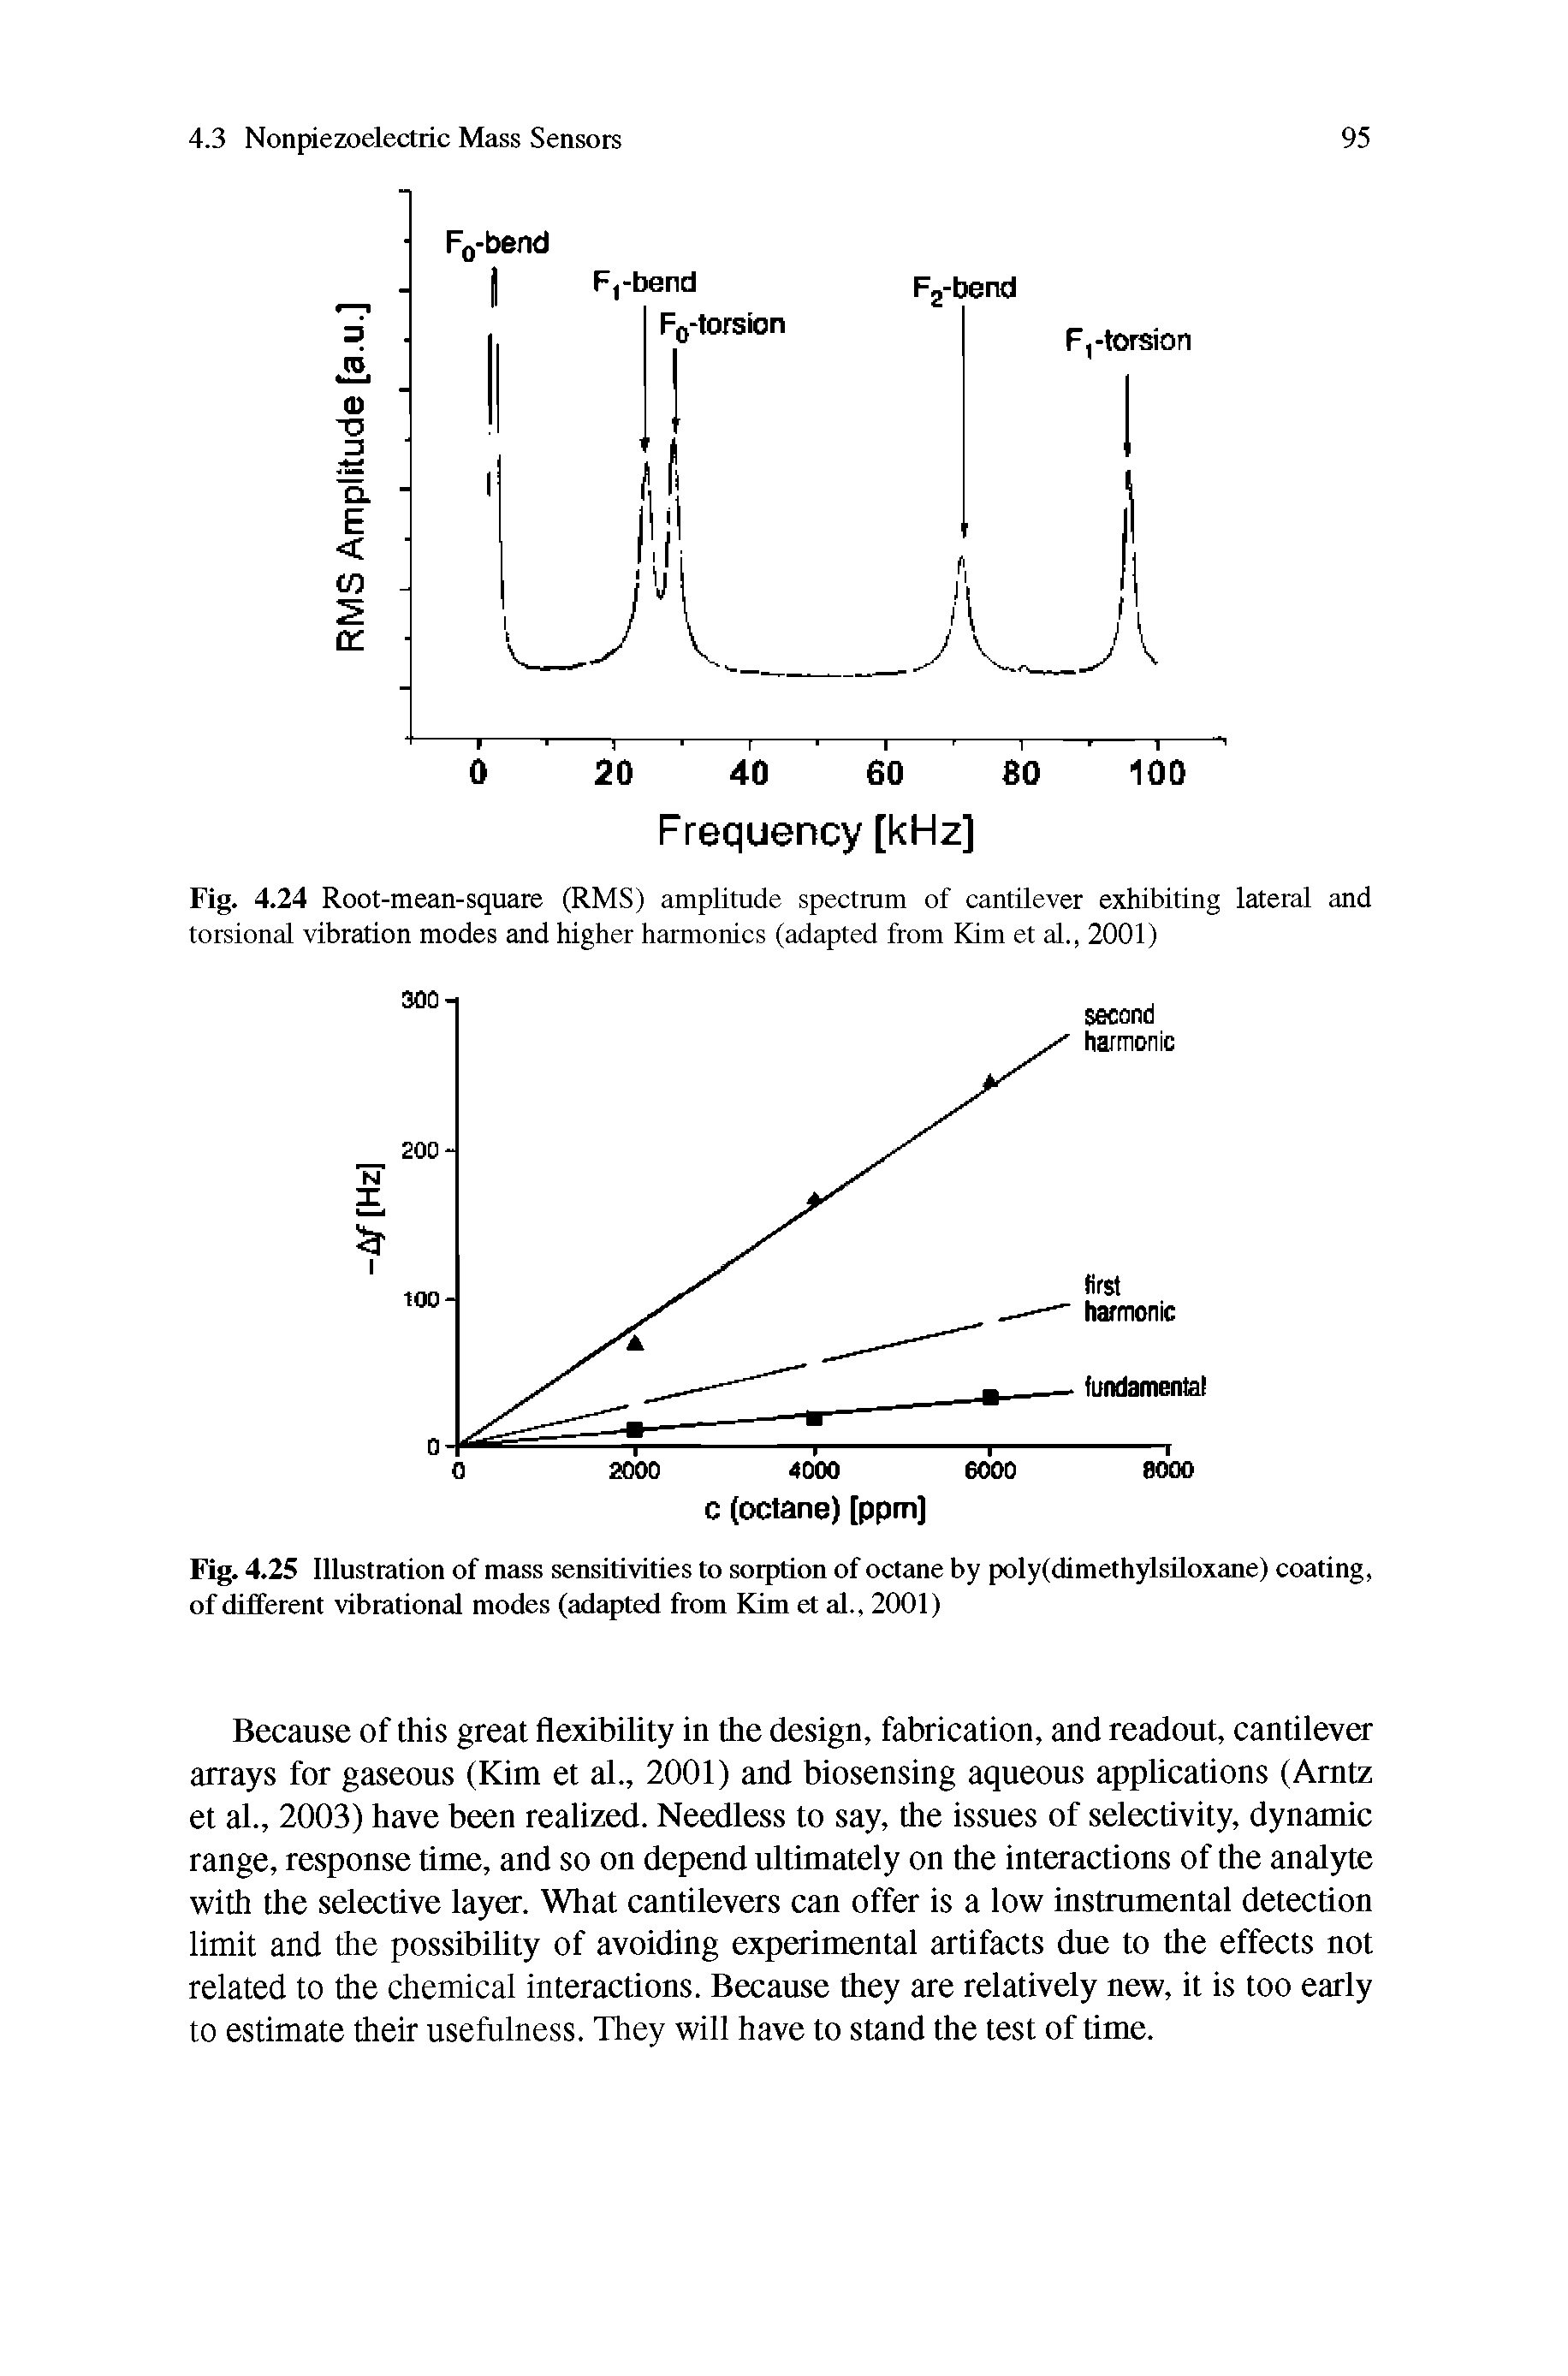 Fig. 4.25 Illustration of mass sensitivities to sorption of octane by poly(dimethylsiloxane) coating, of different vibrational modes (adapted from Kim et al., 2001)...